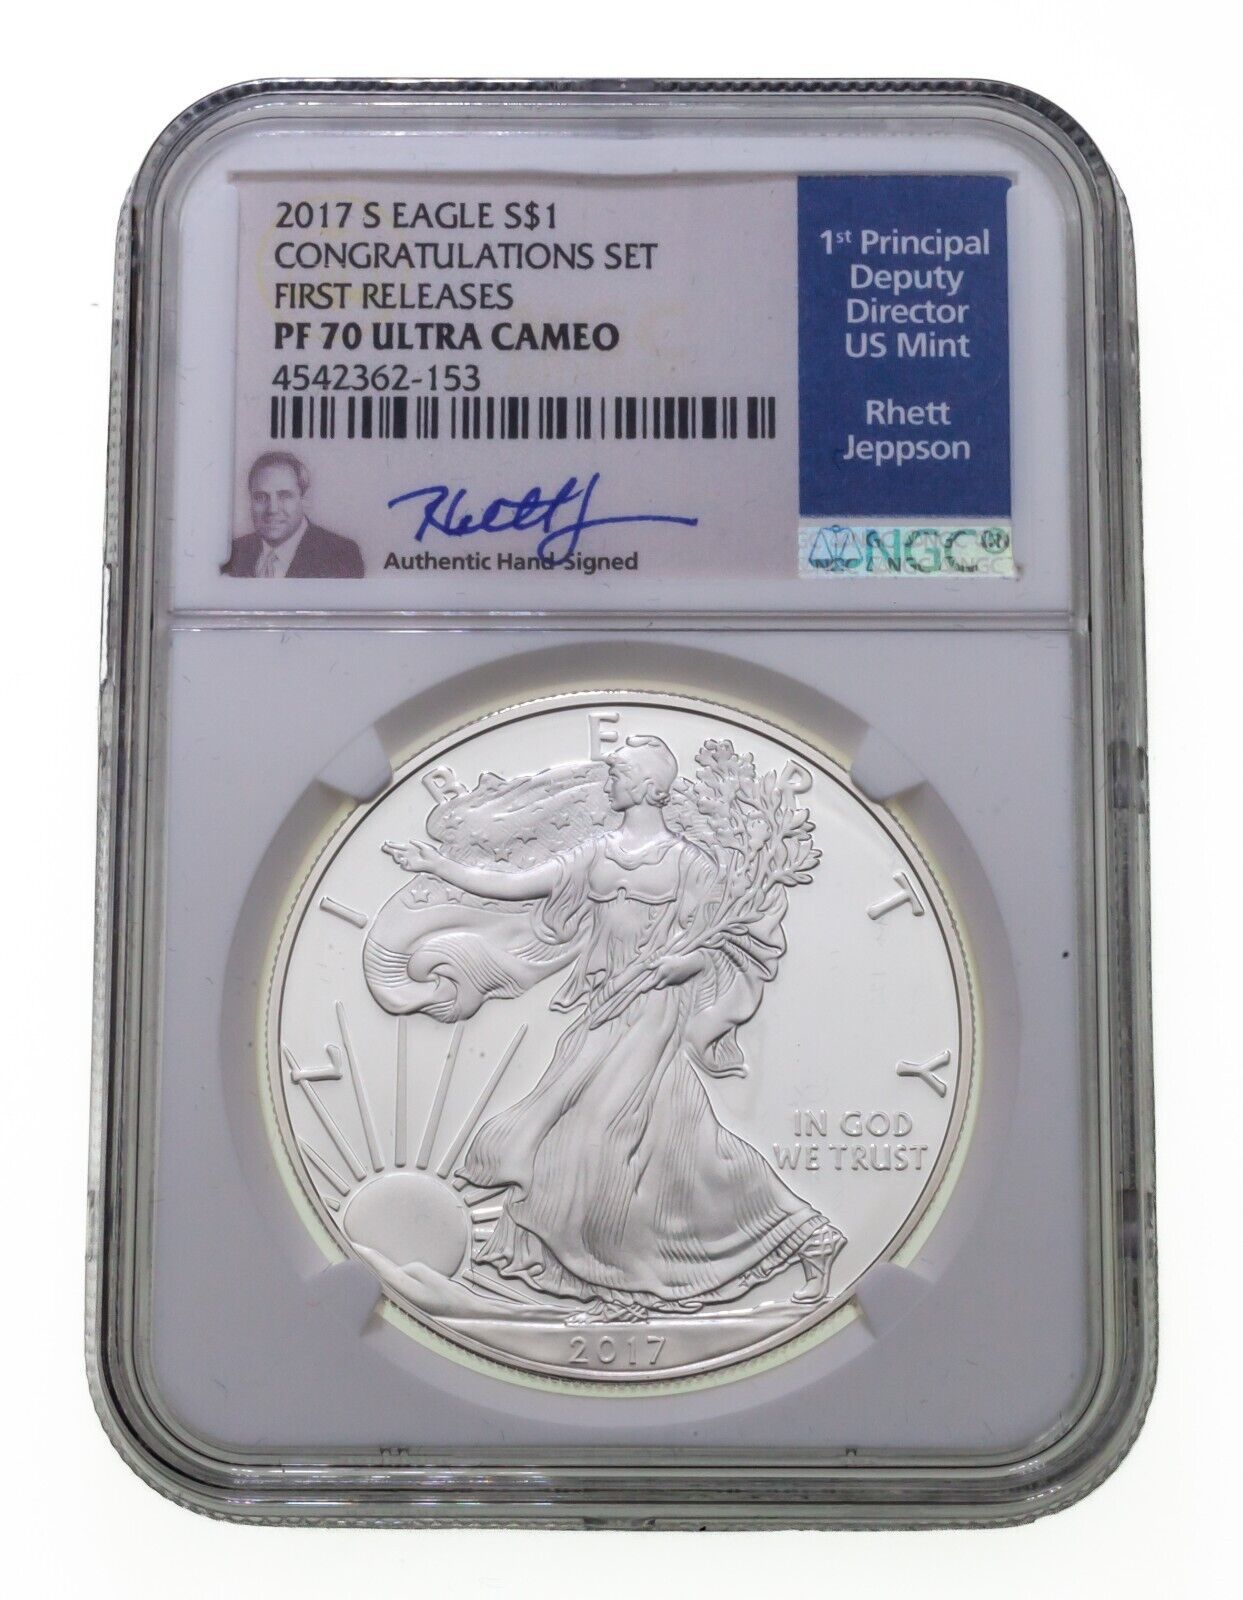 Primary image for 2017-S S$1 Silver American Eagle Graded by NGC as PF70 Ultra Cameo Jeppson